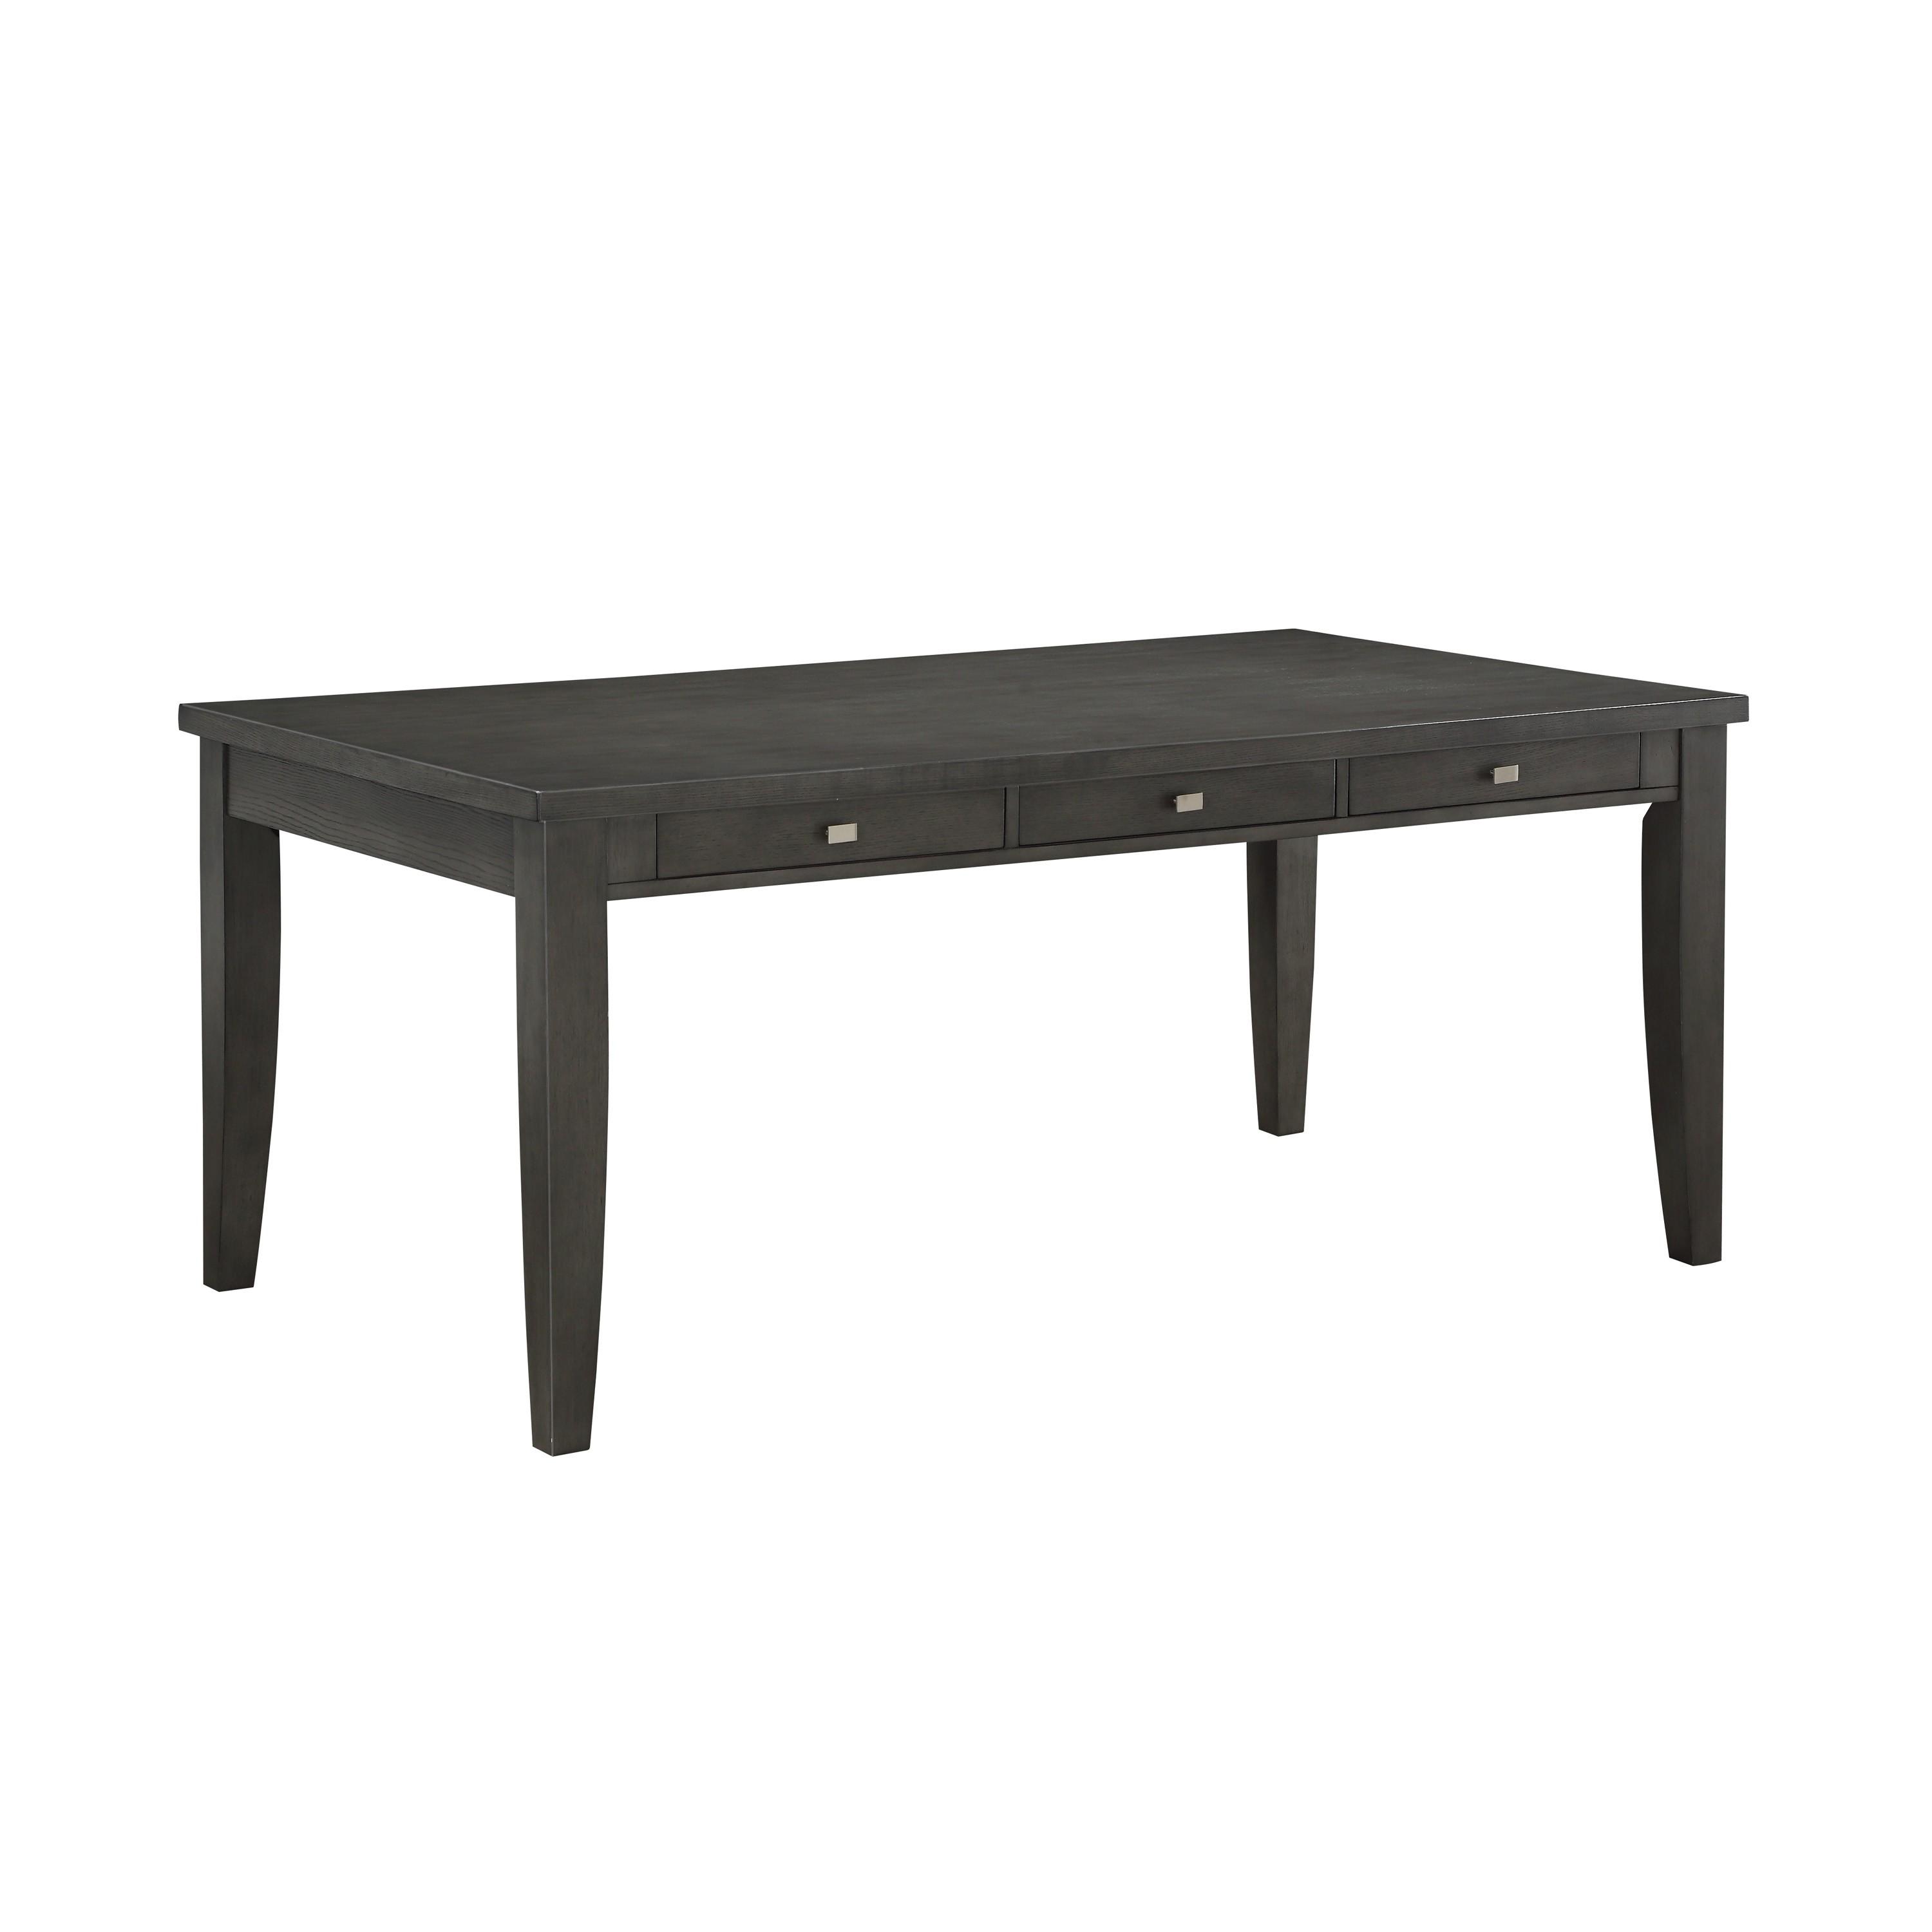 Transitional Dining Table 5674-72 Baresford 5674-72 in Gray 